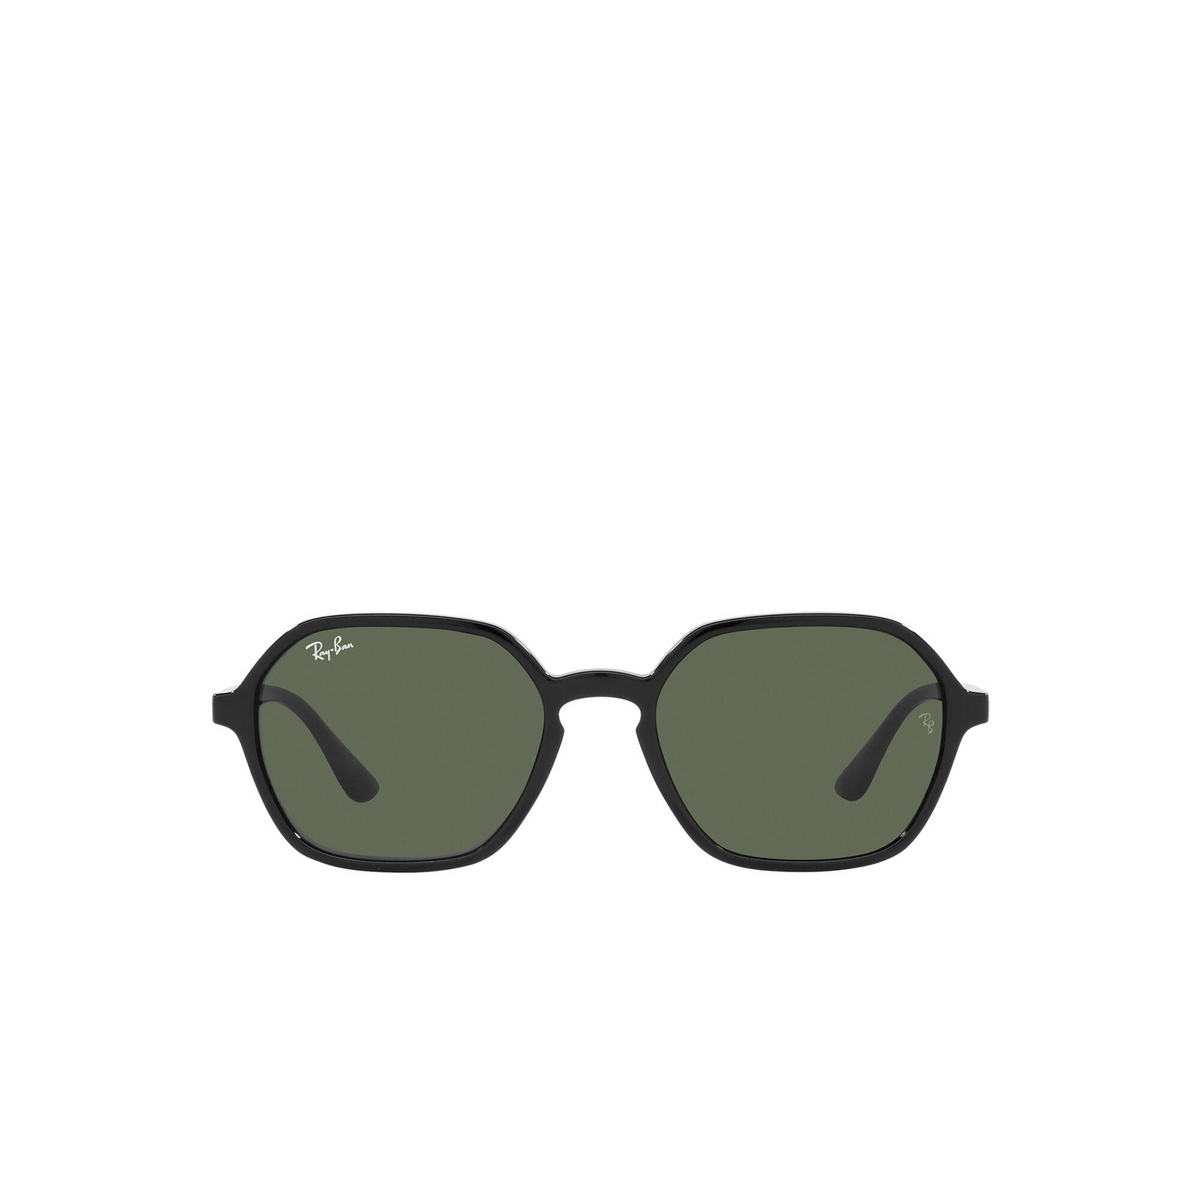 Ray-Ban® Irregular Sunglasses: RB4361 color Black 601/71 - front view.